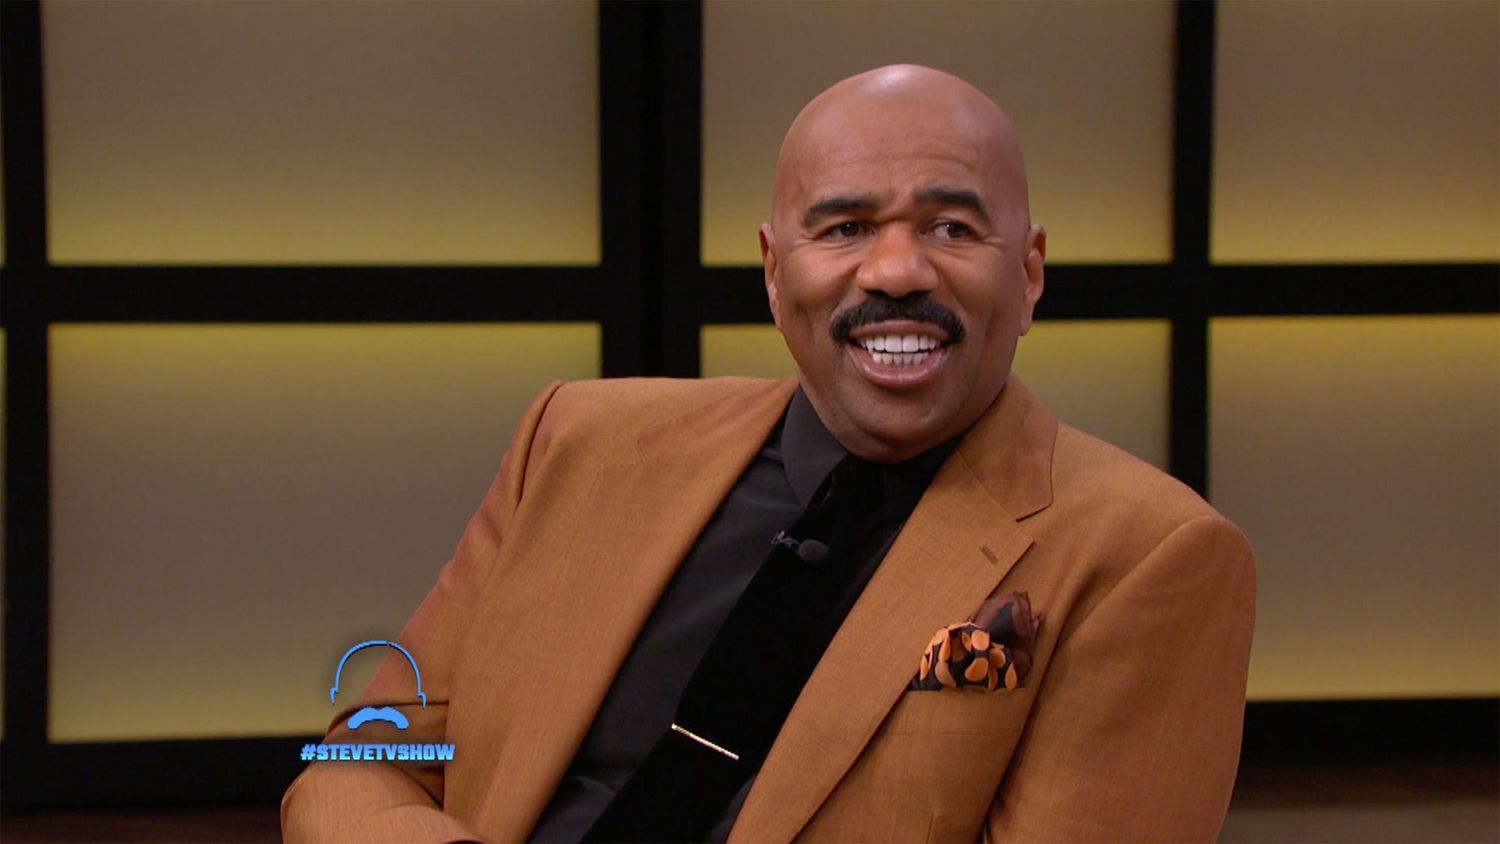 Steve Harvey: Watch His Opening Monologue on Talk Show Finale